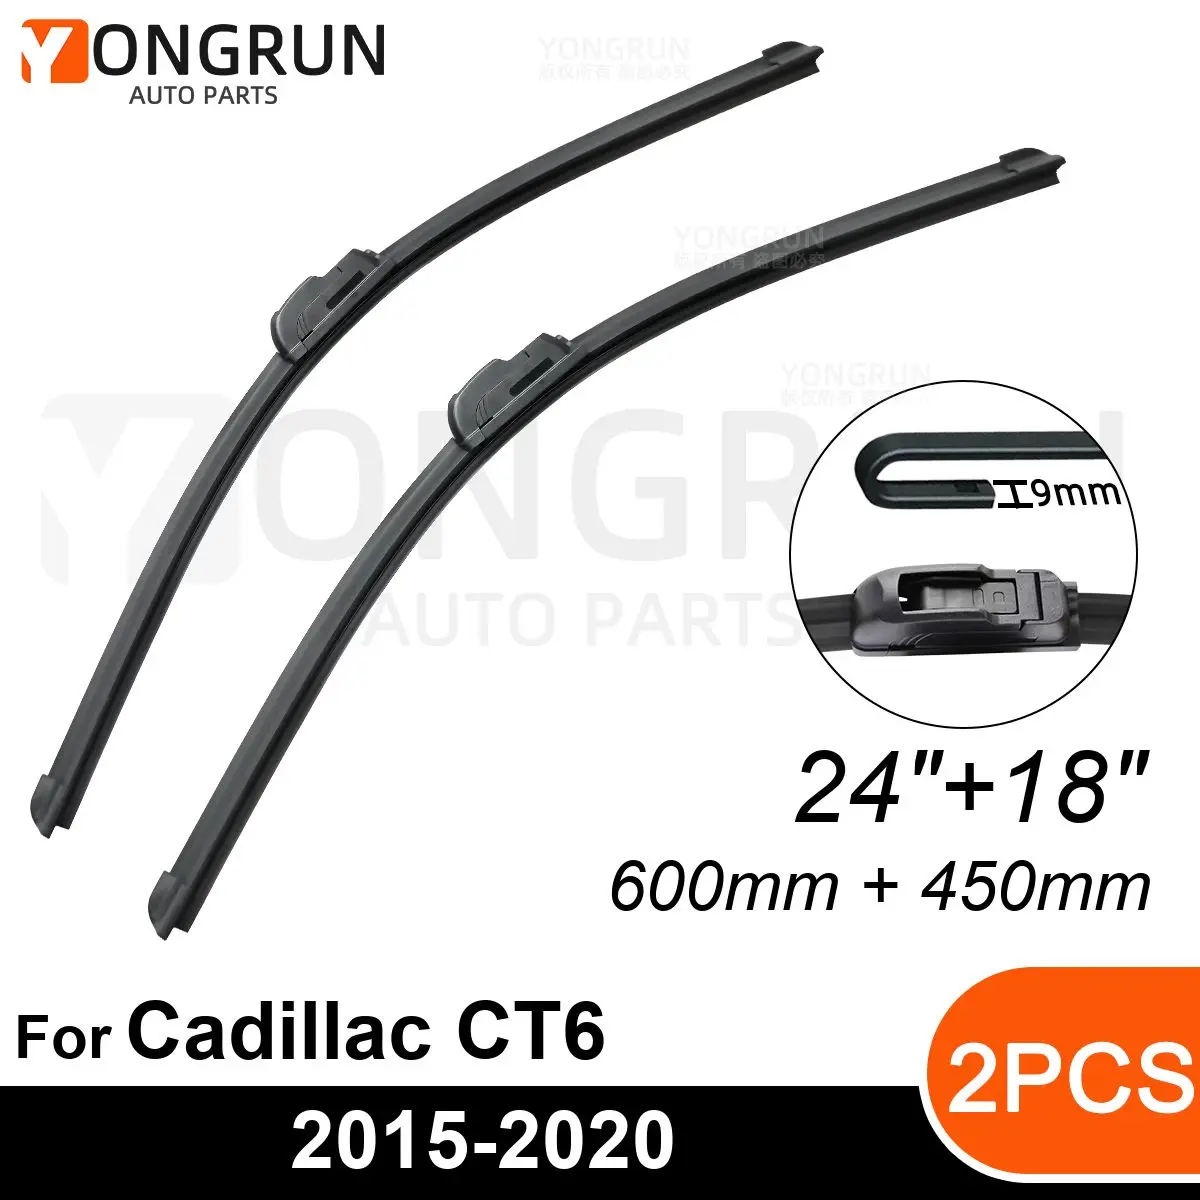 

Car Windshield Windscreen Front Wiper Blade Rubber Accessories For Cadillac CT6 24"+18" 2015-2020 2015 2016 2017 2018 2019 2020